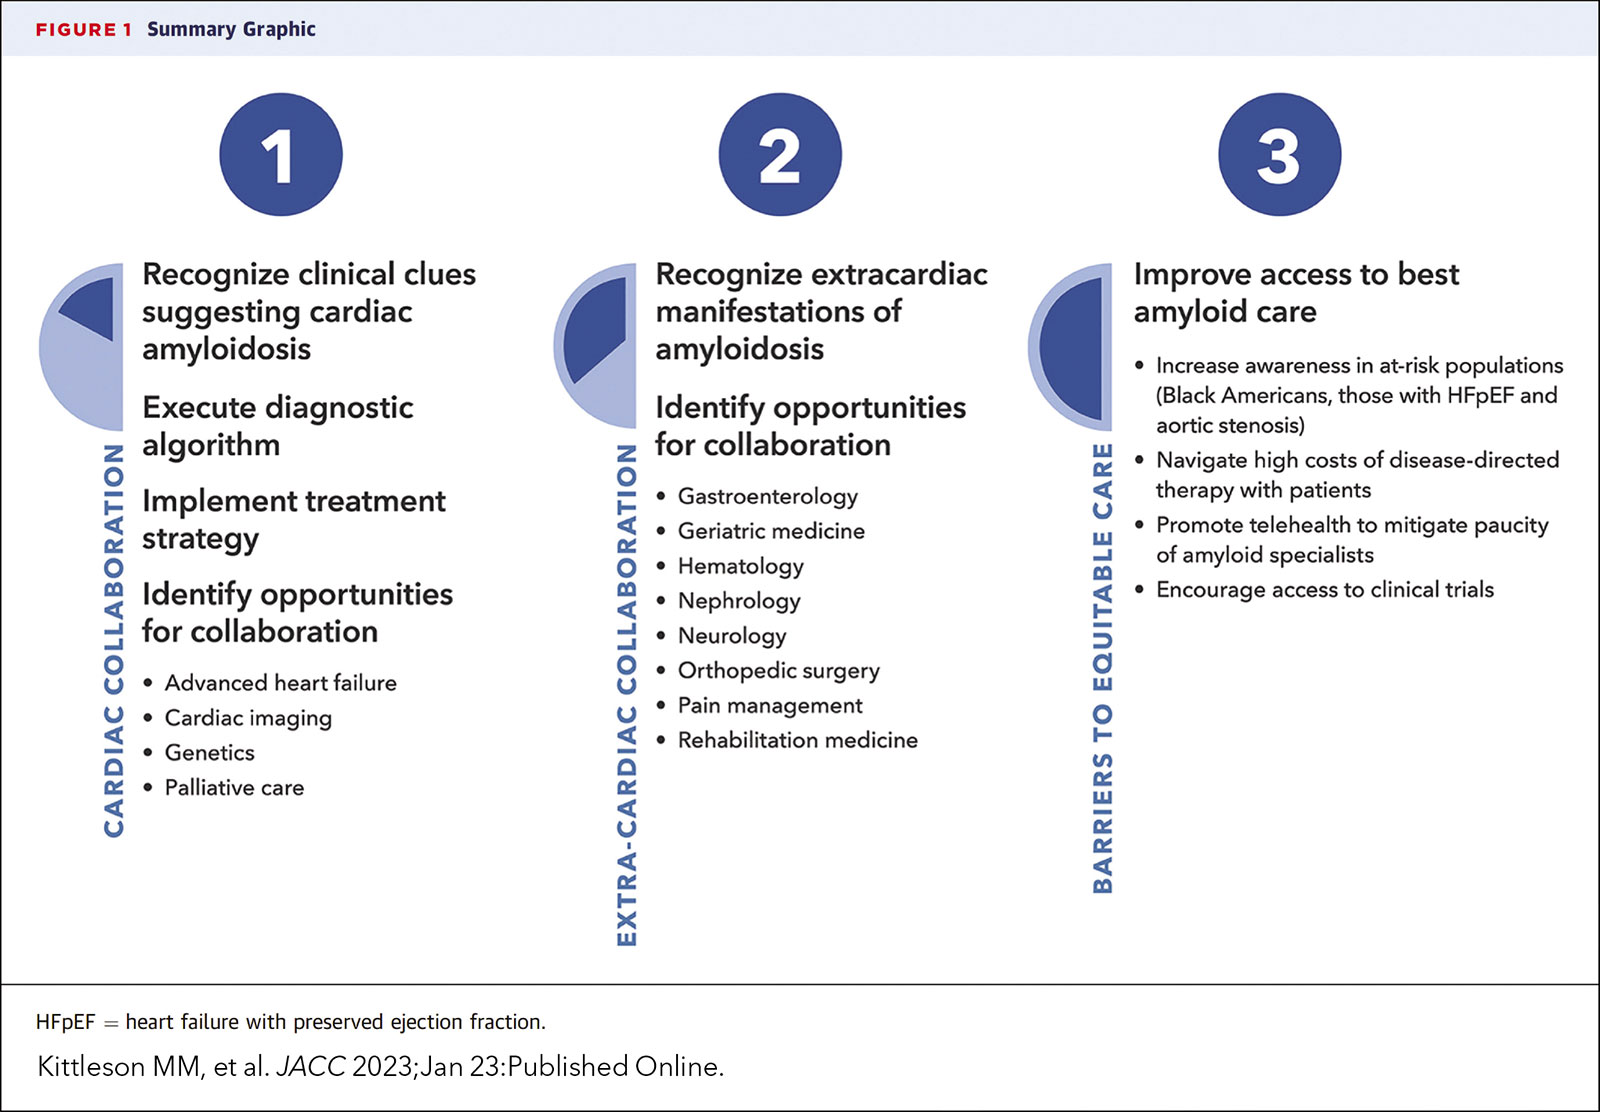 Supporting Clinical Care: New Expert Consensus Decision Pathway on Cardiac Amyloidosis